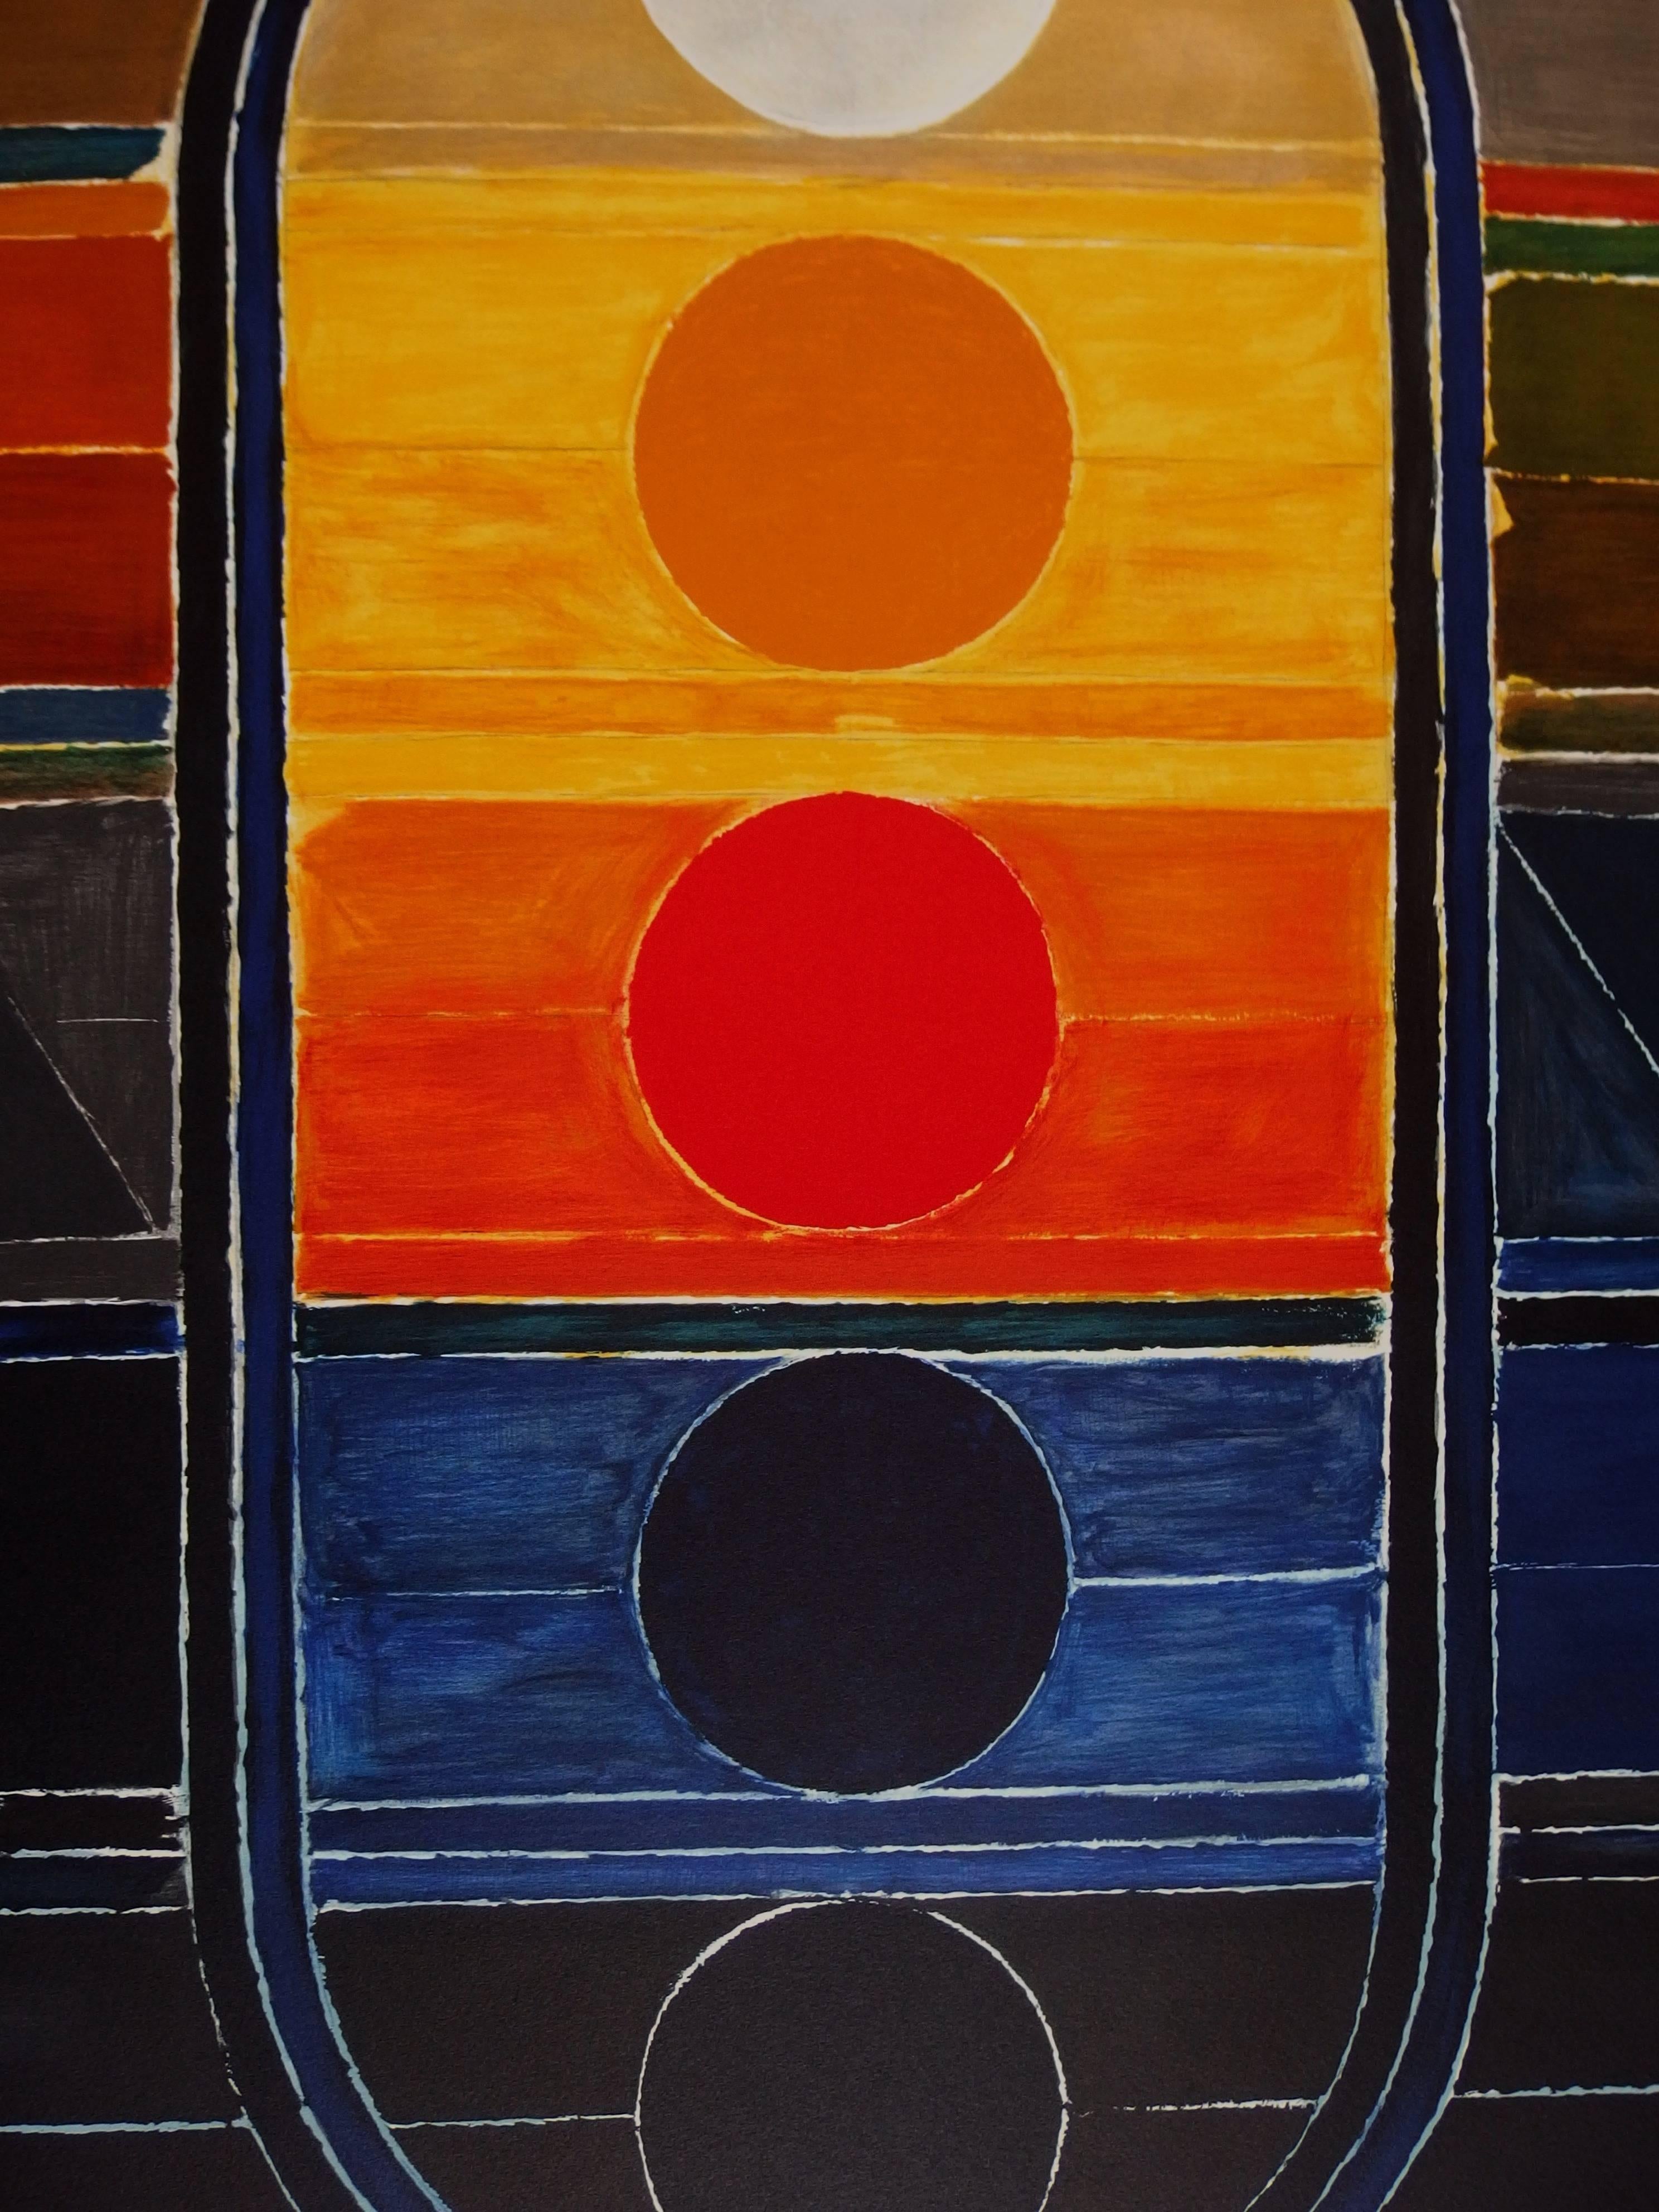 Five elements - Original handsigned lithograph - 150 copies - Black Abstract Print by Sayed Haider Raza